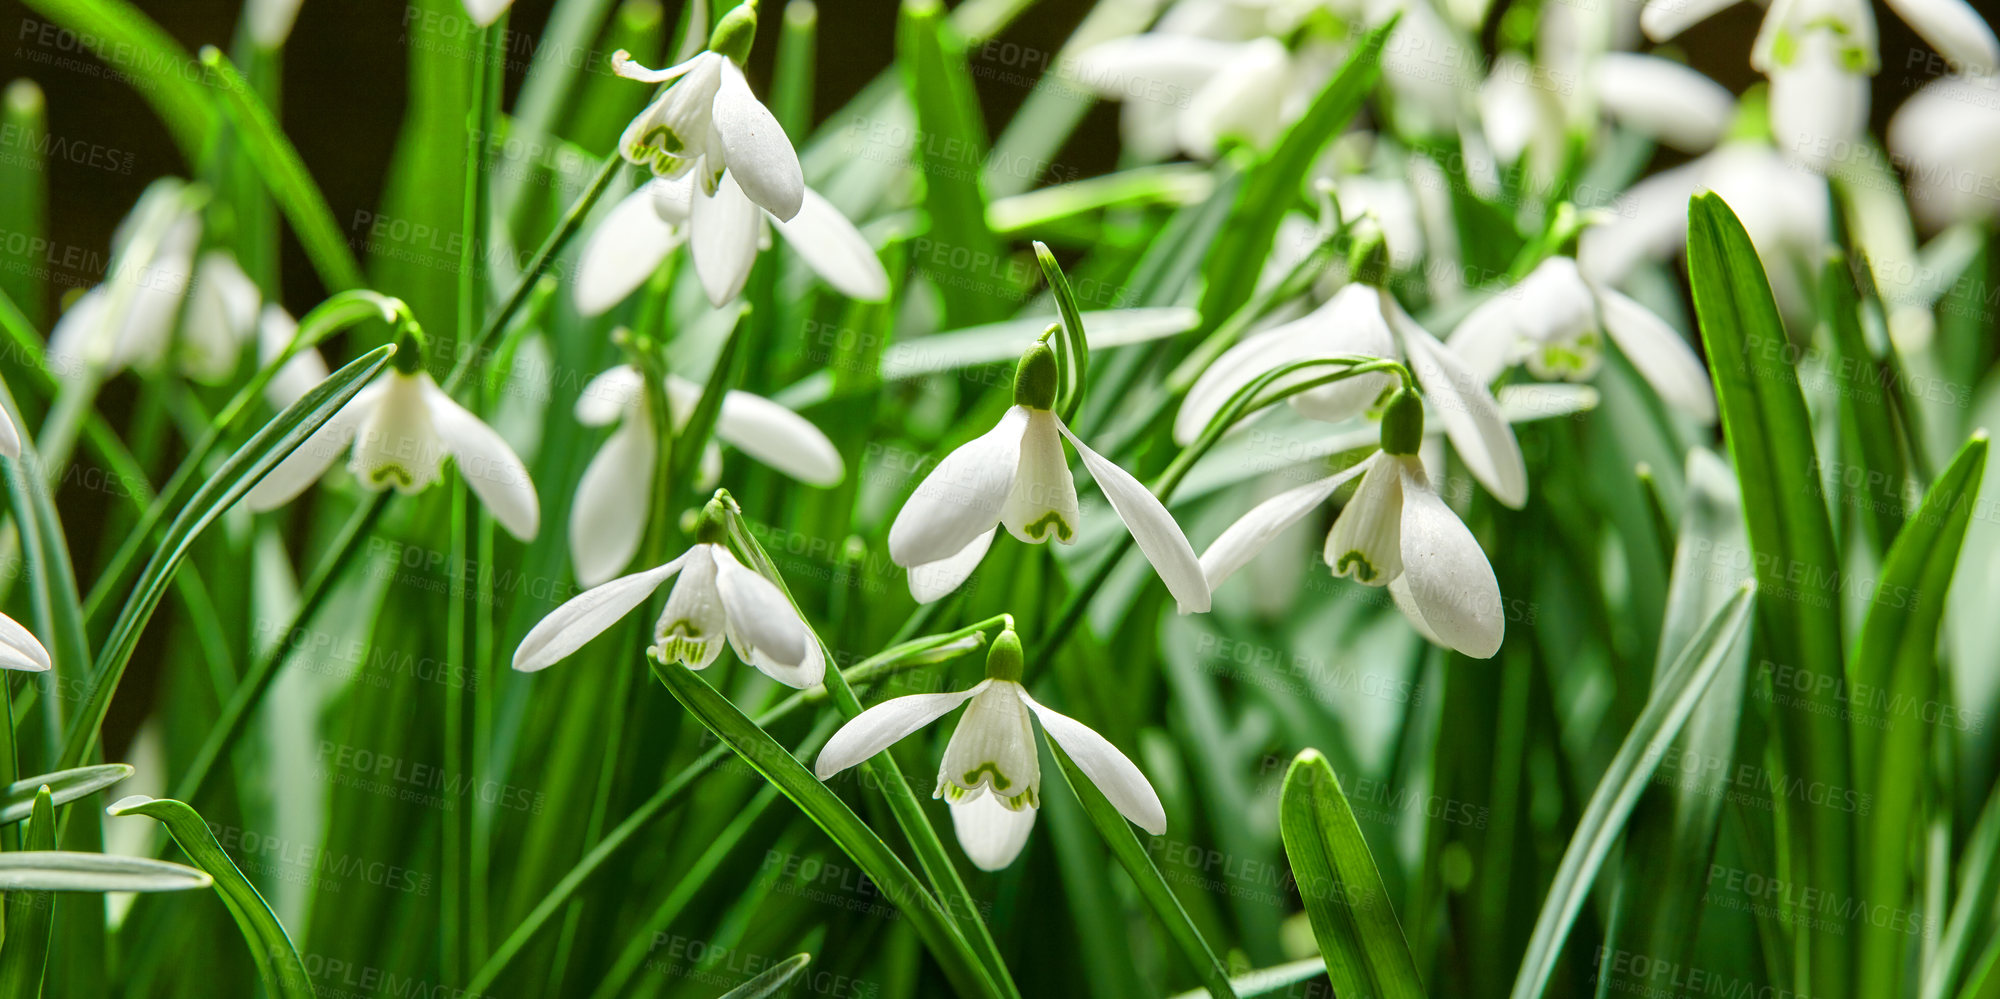 Buy stock photo Closeup of white snowdrop flower or galanthus nivalis blossoming in nature during spring. Bulbous, perennial and herbaceous plant from the amaryllidaceae species thriving in a green garden outdoors